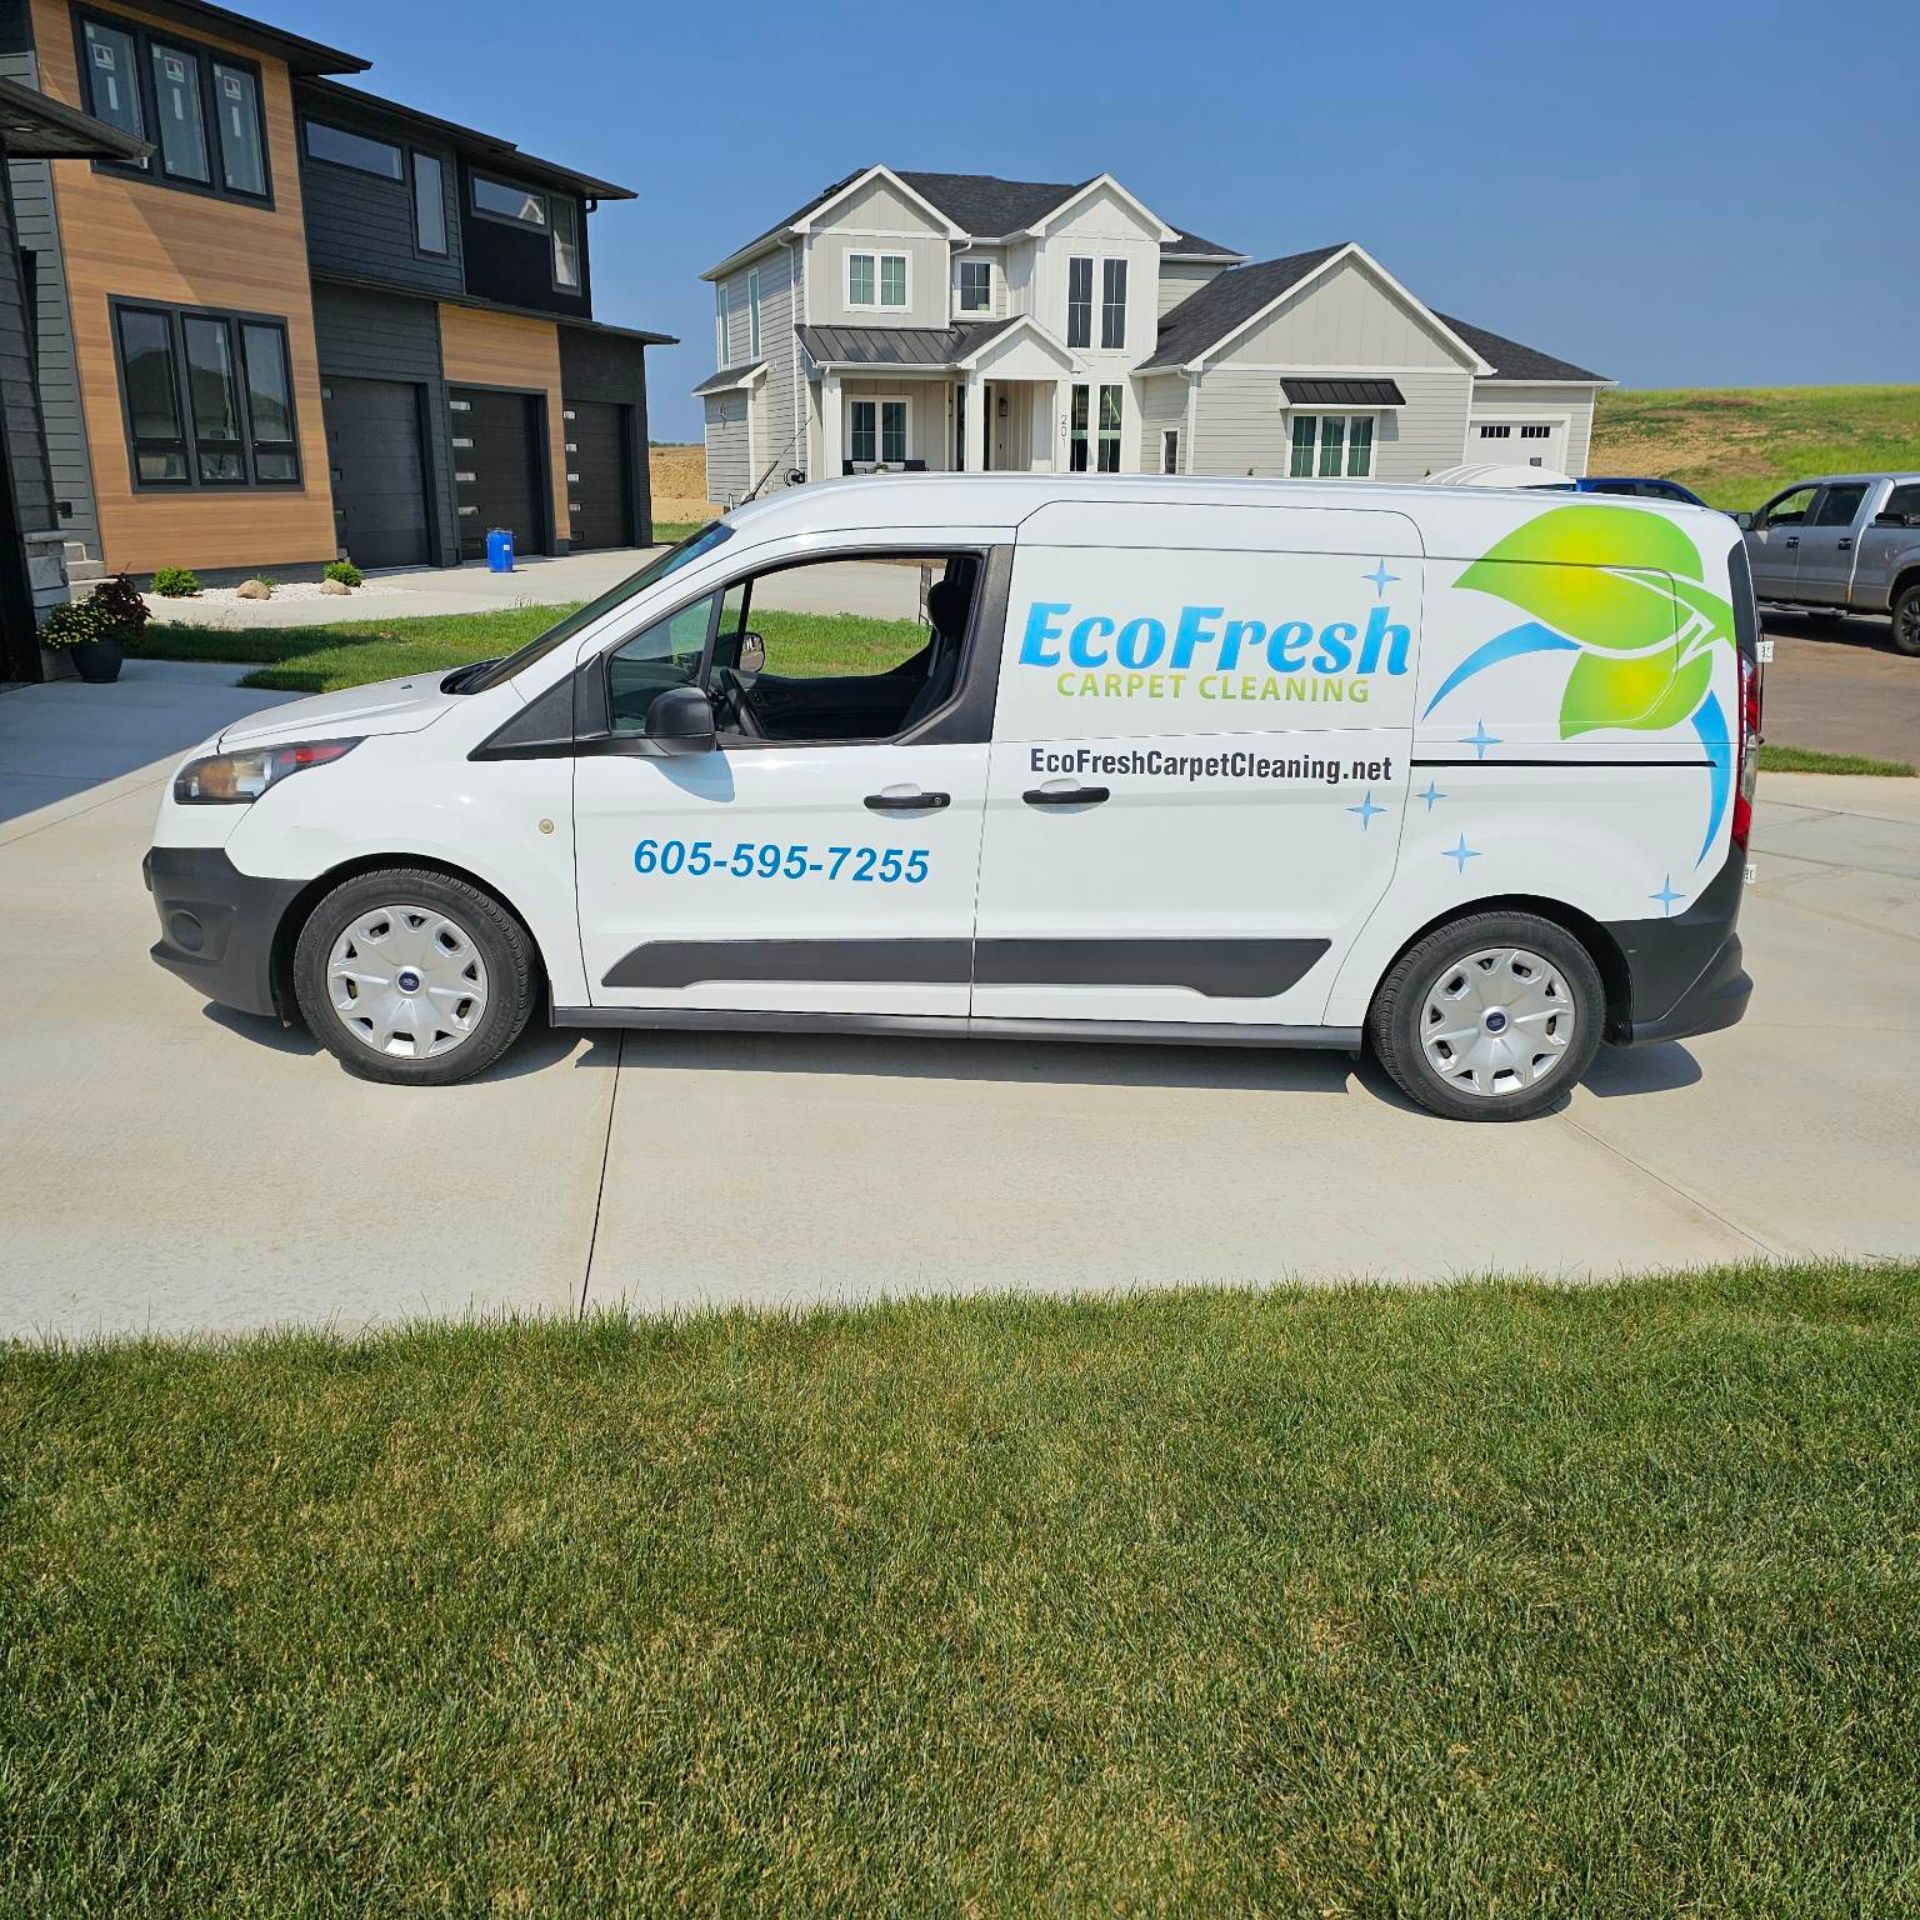 Carpet Cleaning In Humboldt Sd